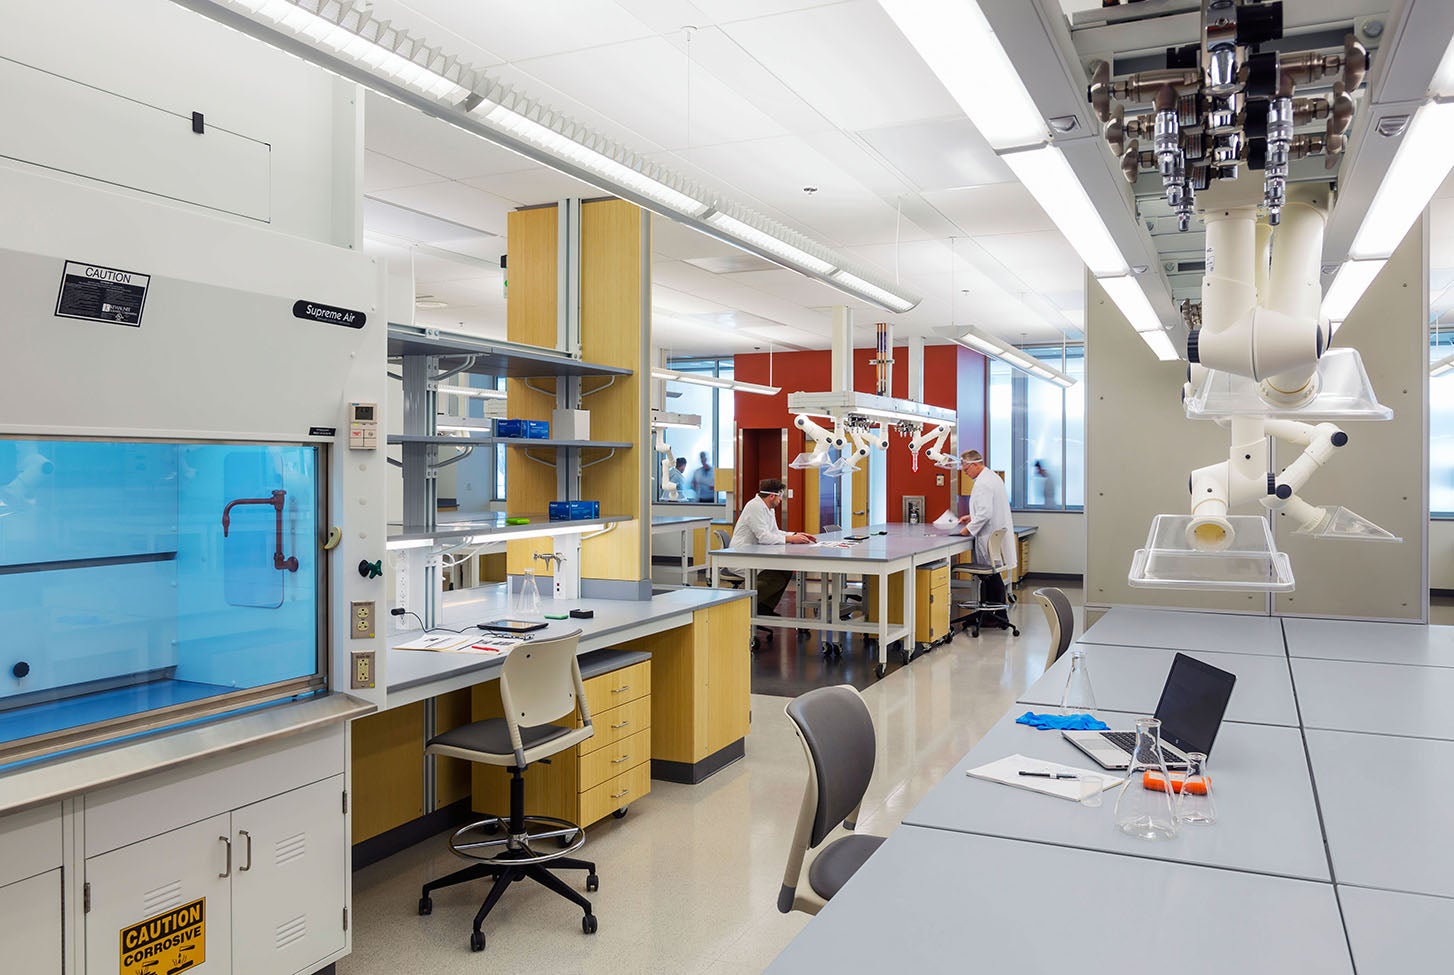 Maryland Public Health Lab with red and yellow accent walls